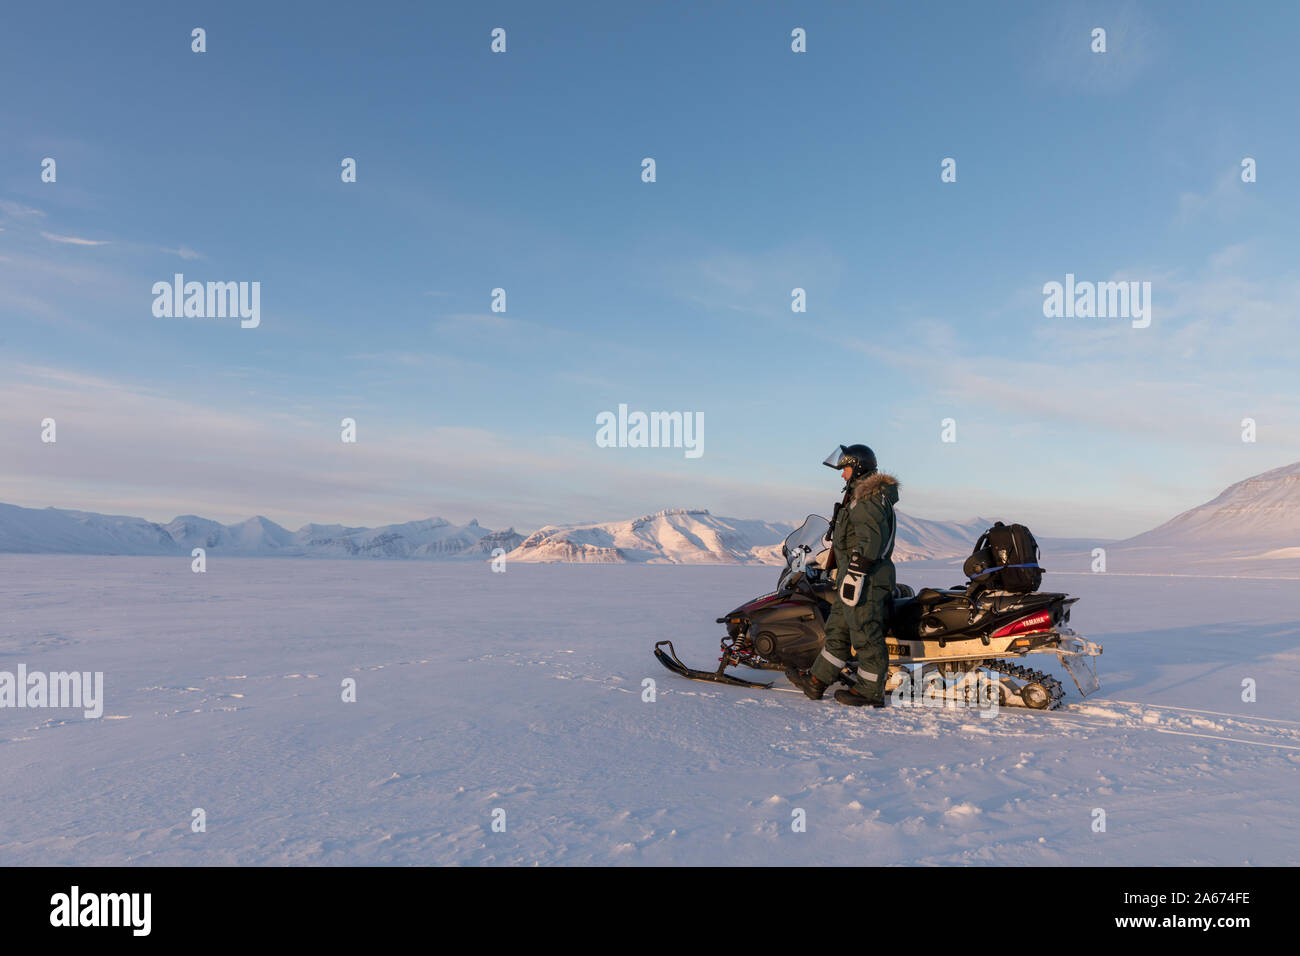 Svalbard, Norway - March 2019: Man standing next to a Yamaha snowmobile in arctic landscape at Svalbard Stock Photo